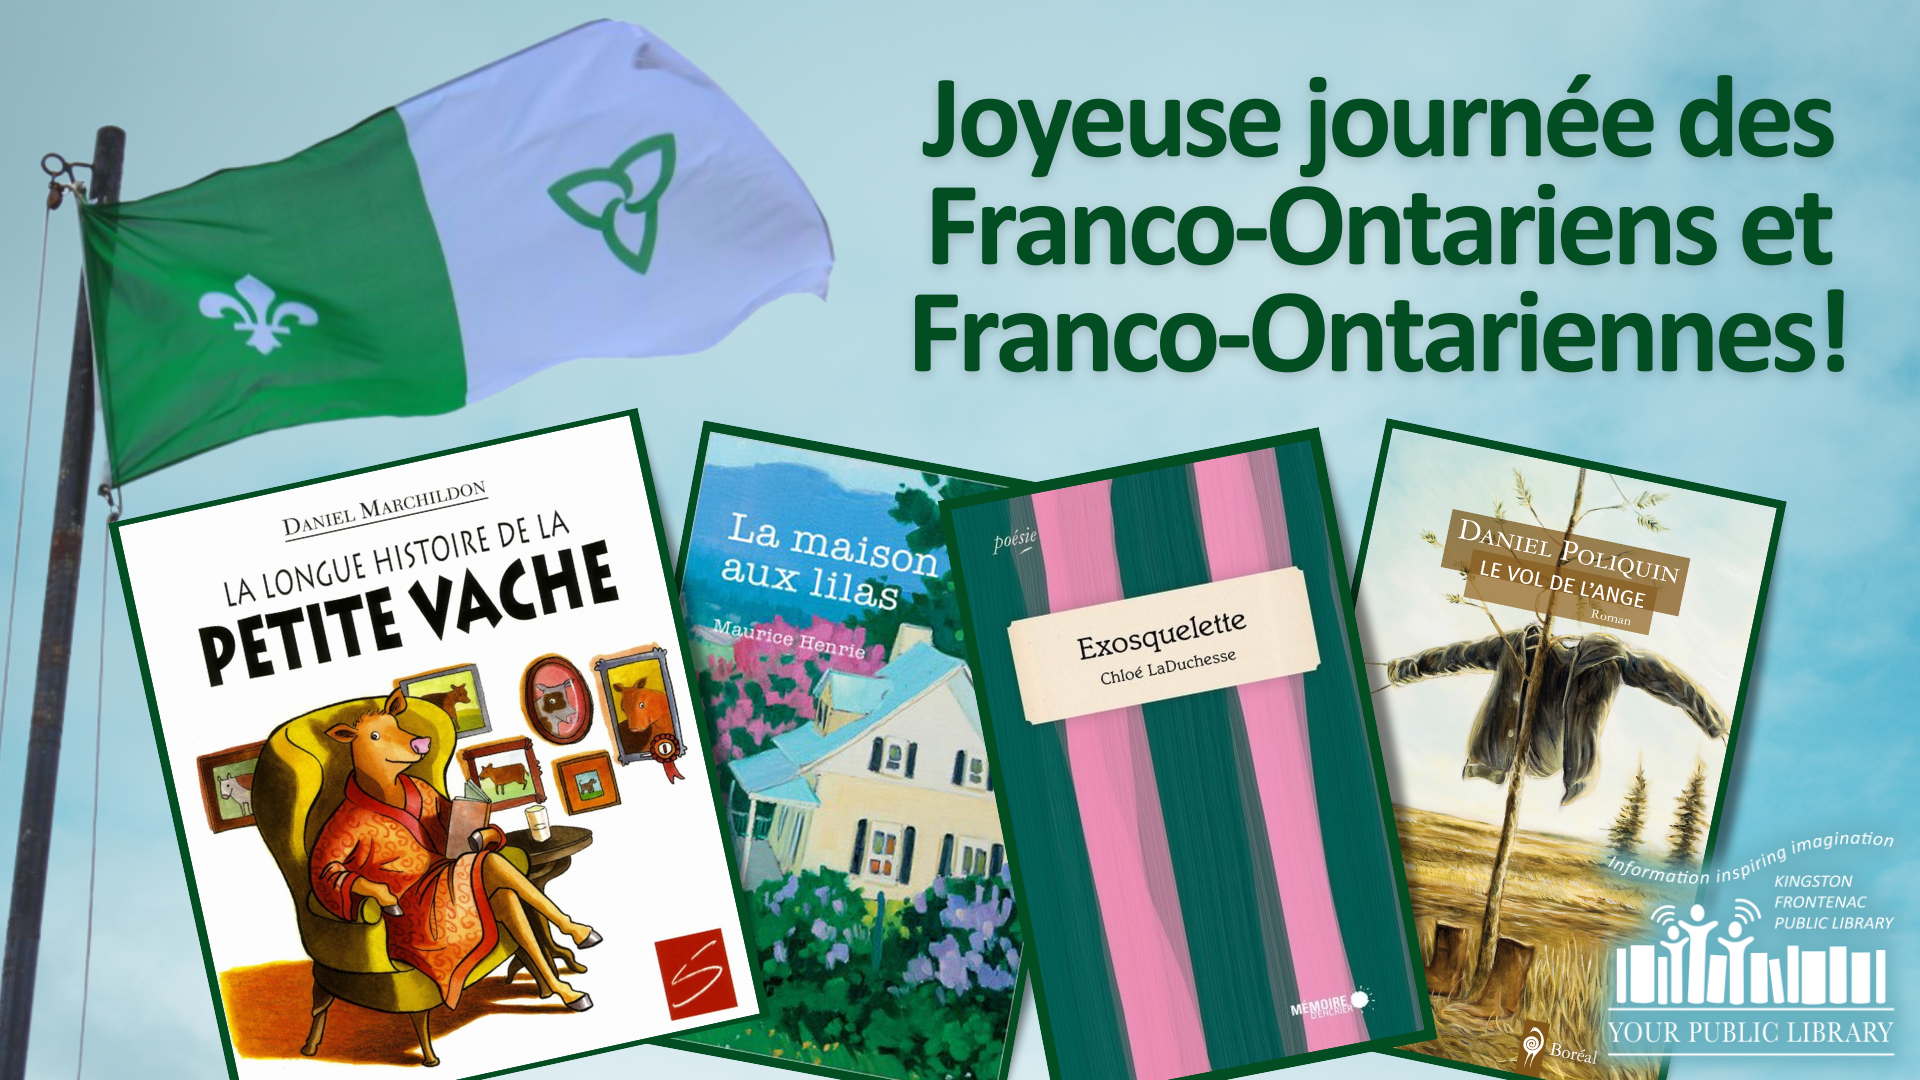 The Franco-Ontarian flag with a collage of books and text reading  Joyeuse journée des Franco-Ontariens et Franco-Ontariennes!